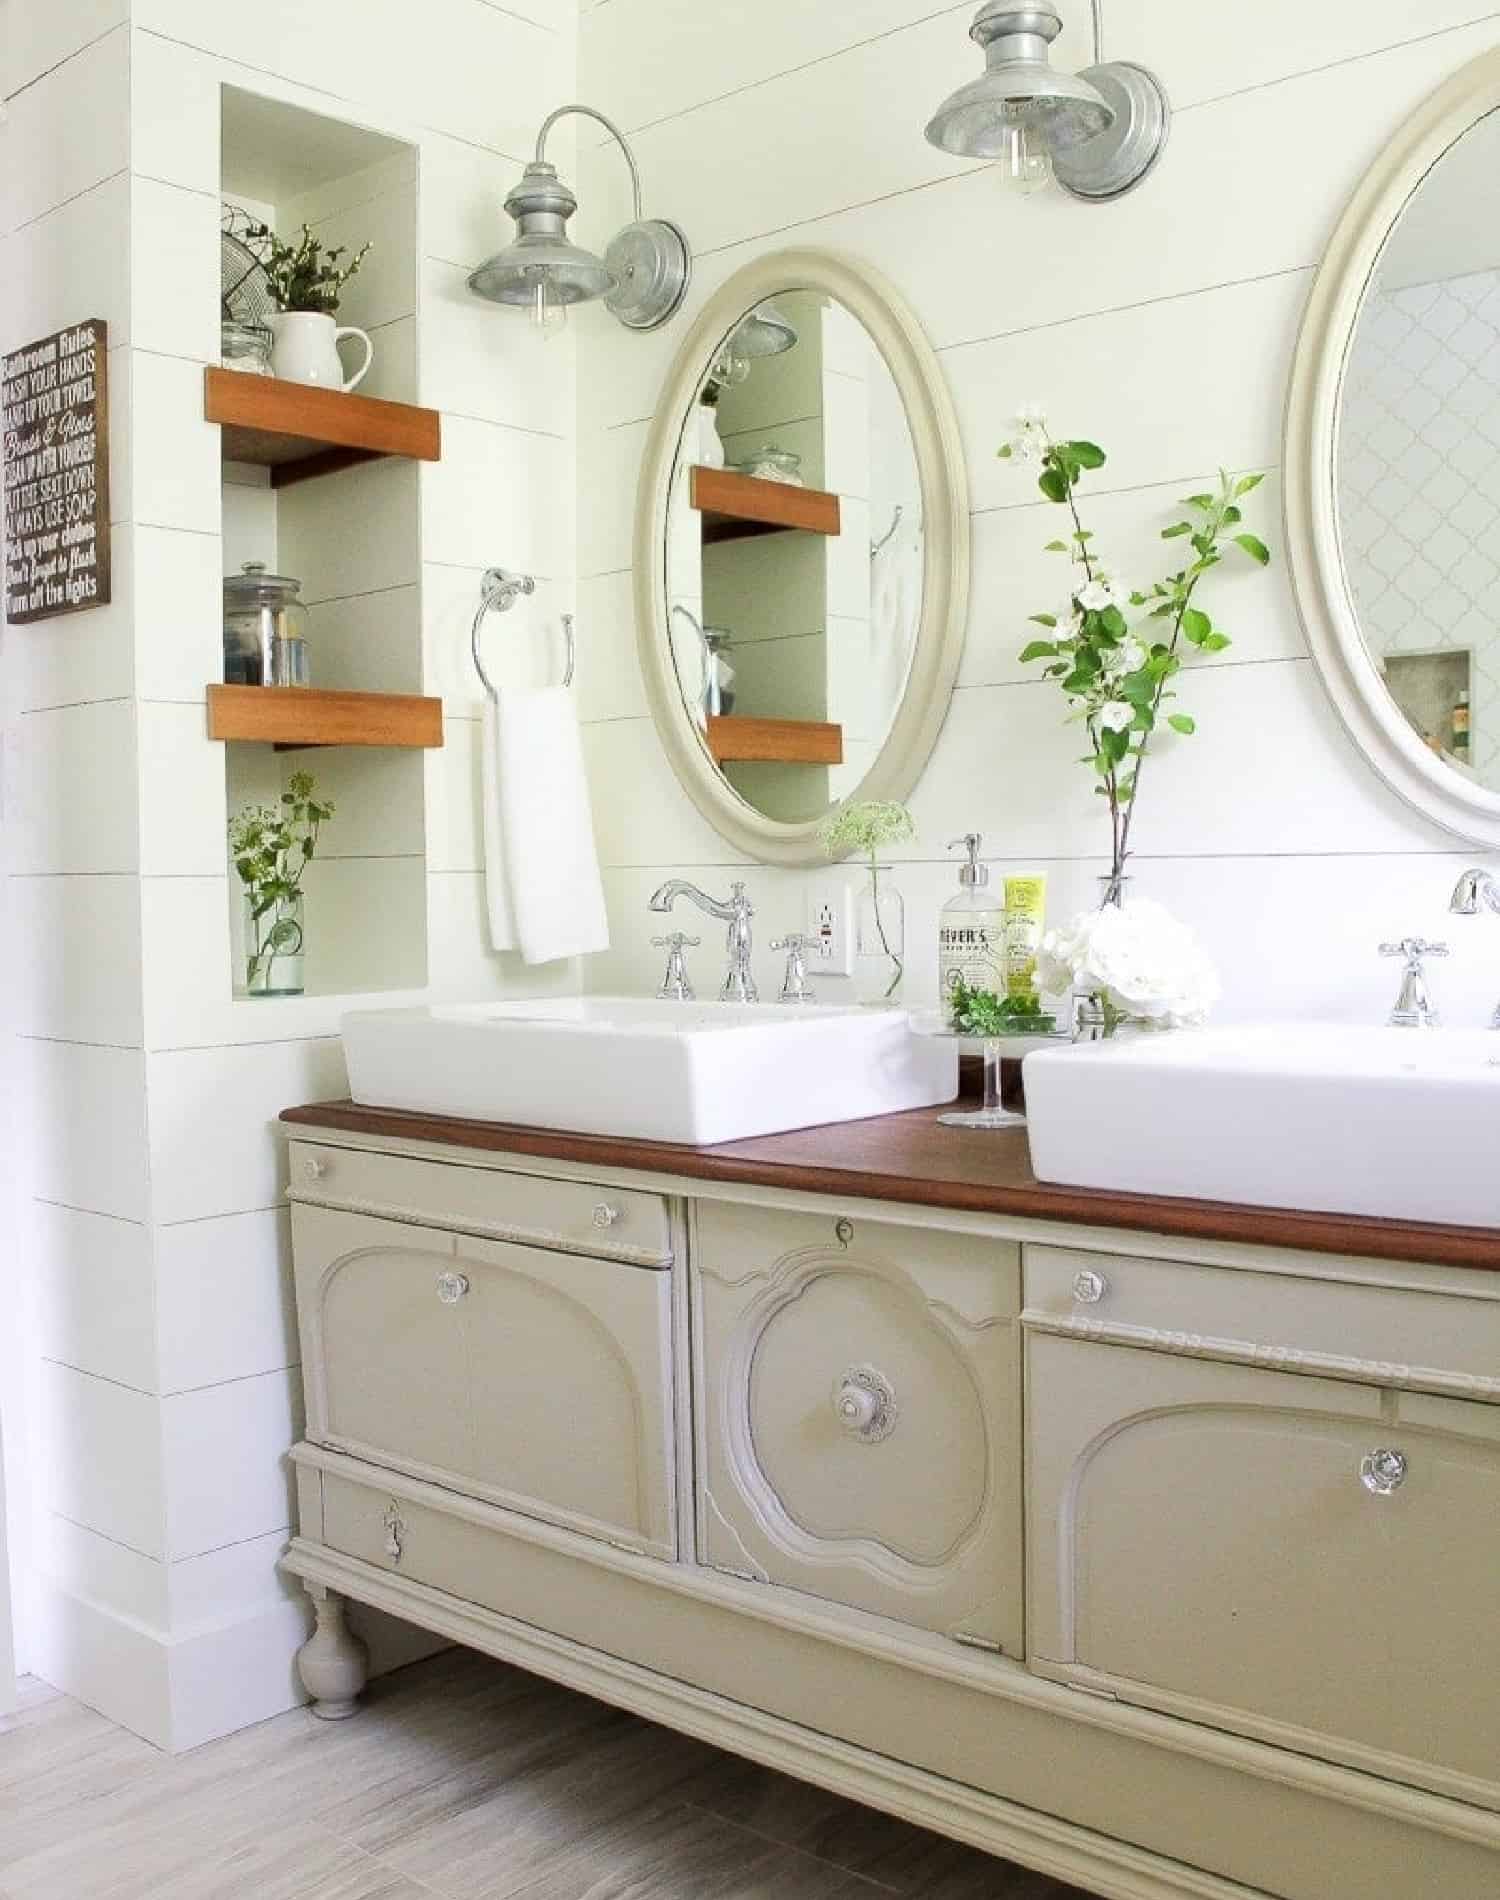 Traditional Farmhouse Bathroom in neutral colors and dual sinks.